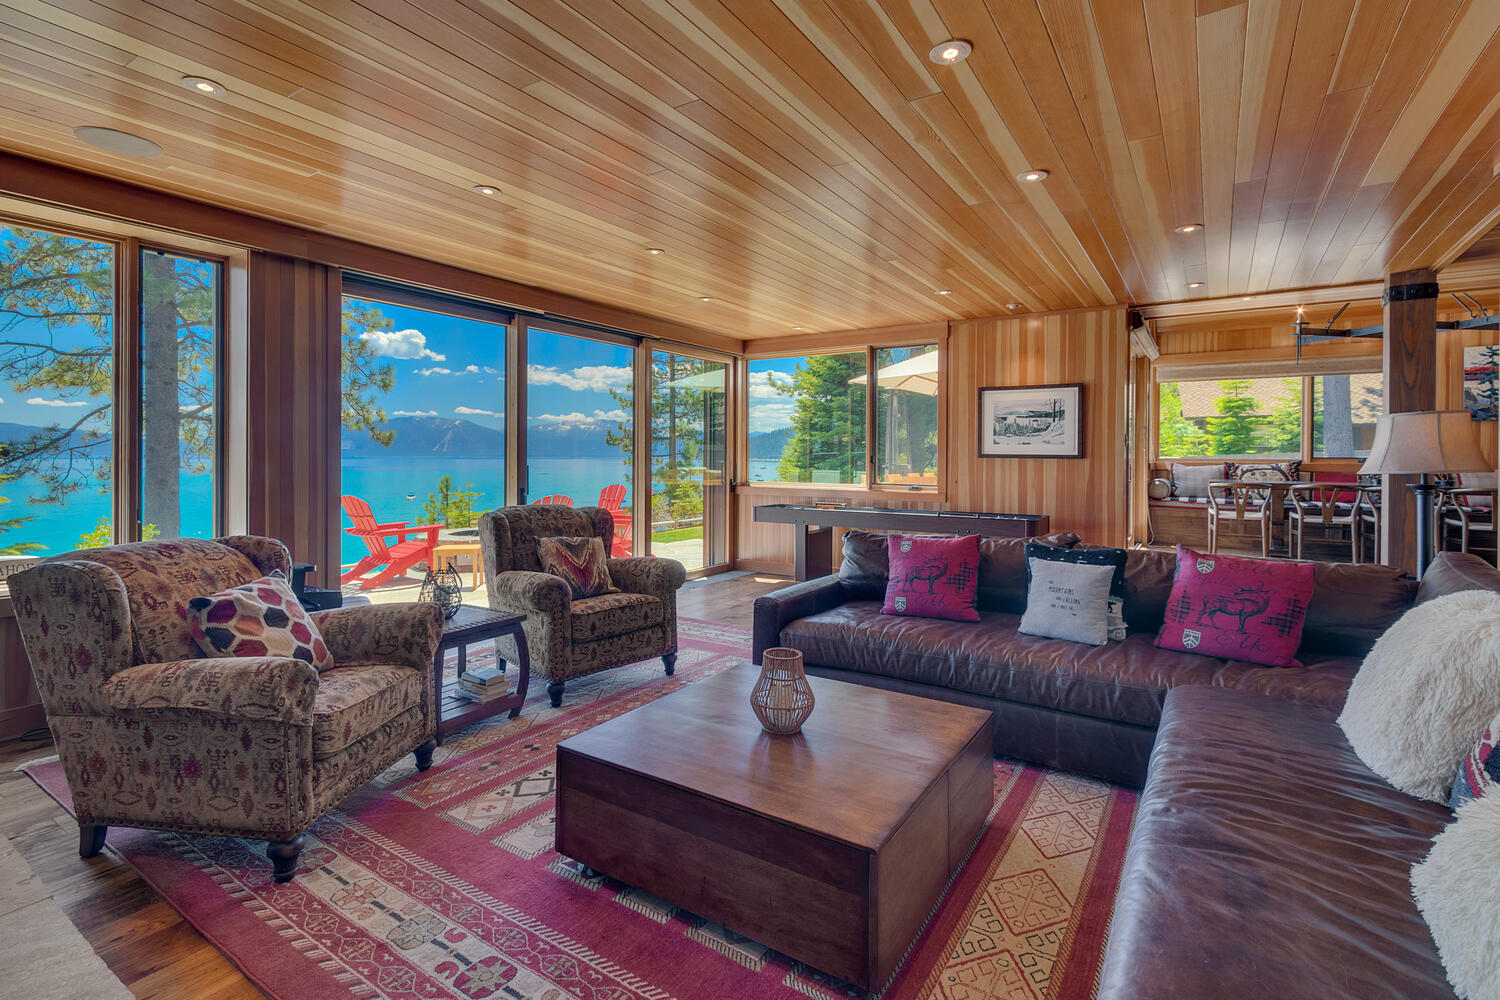 Your Tahoe Relocation Guide - Let's Get Settled In | Tahoe Luxury ...